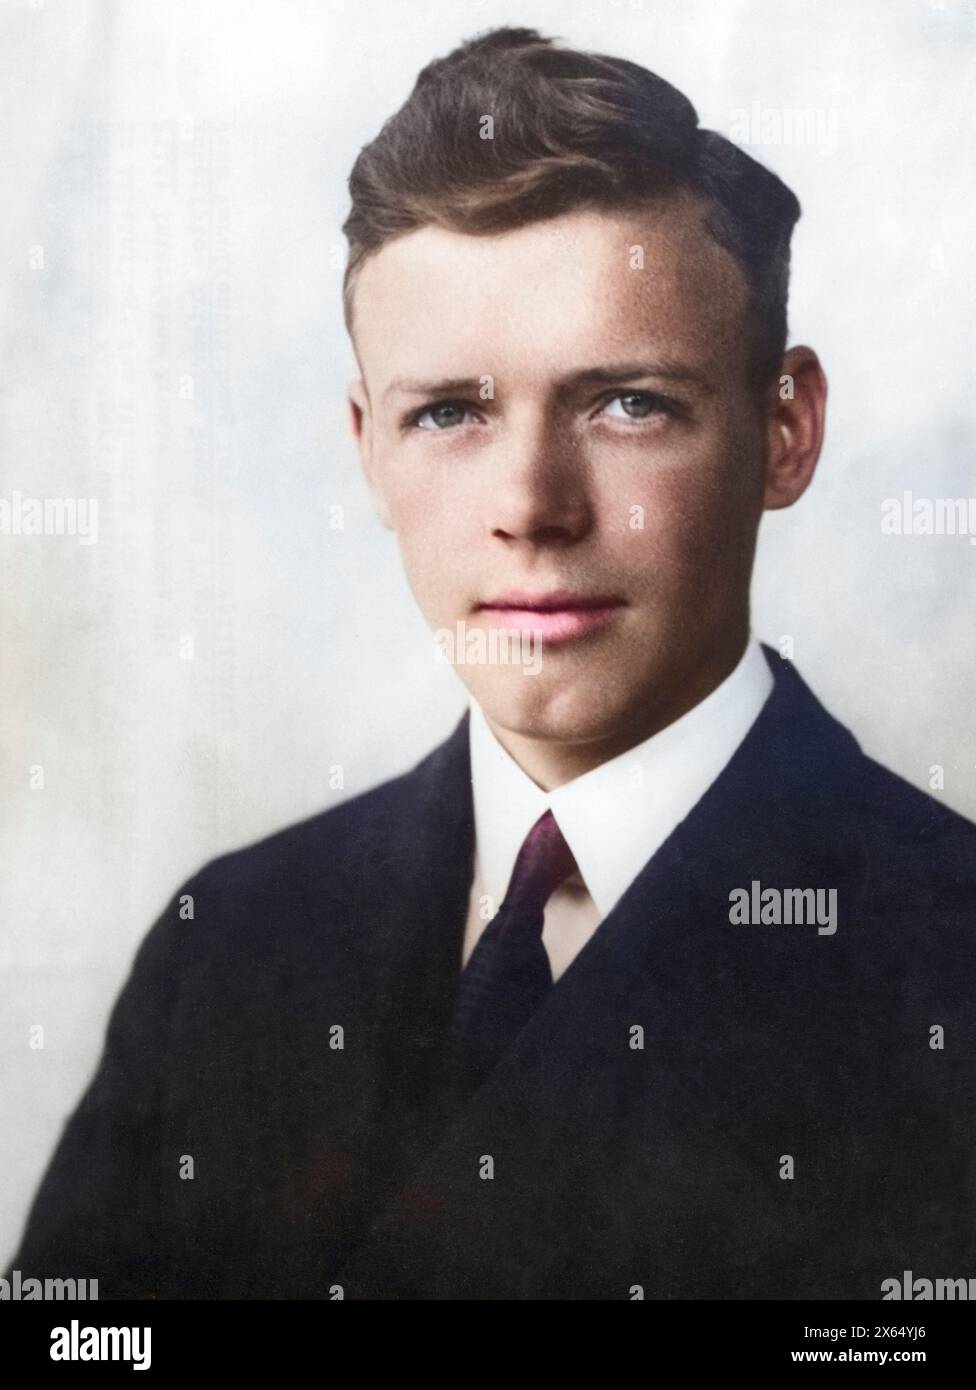 Lindbergh, Charles, 4.2.1902 - 26.8.1974, American aviator, portrait, 1920s, ADDITIONAL-RIGHTS-CLEARANCE-INFO-NOT-AVAILABLE Stock Photo